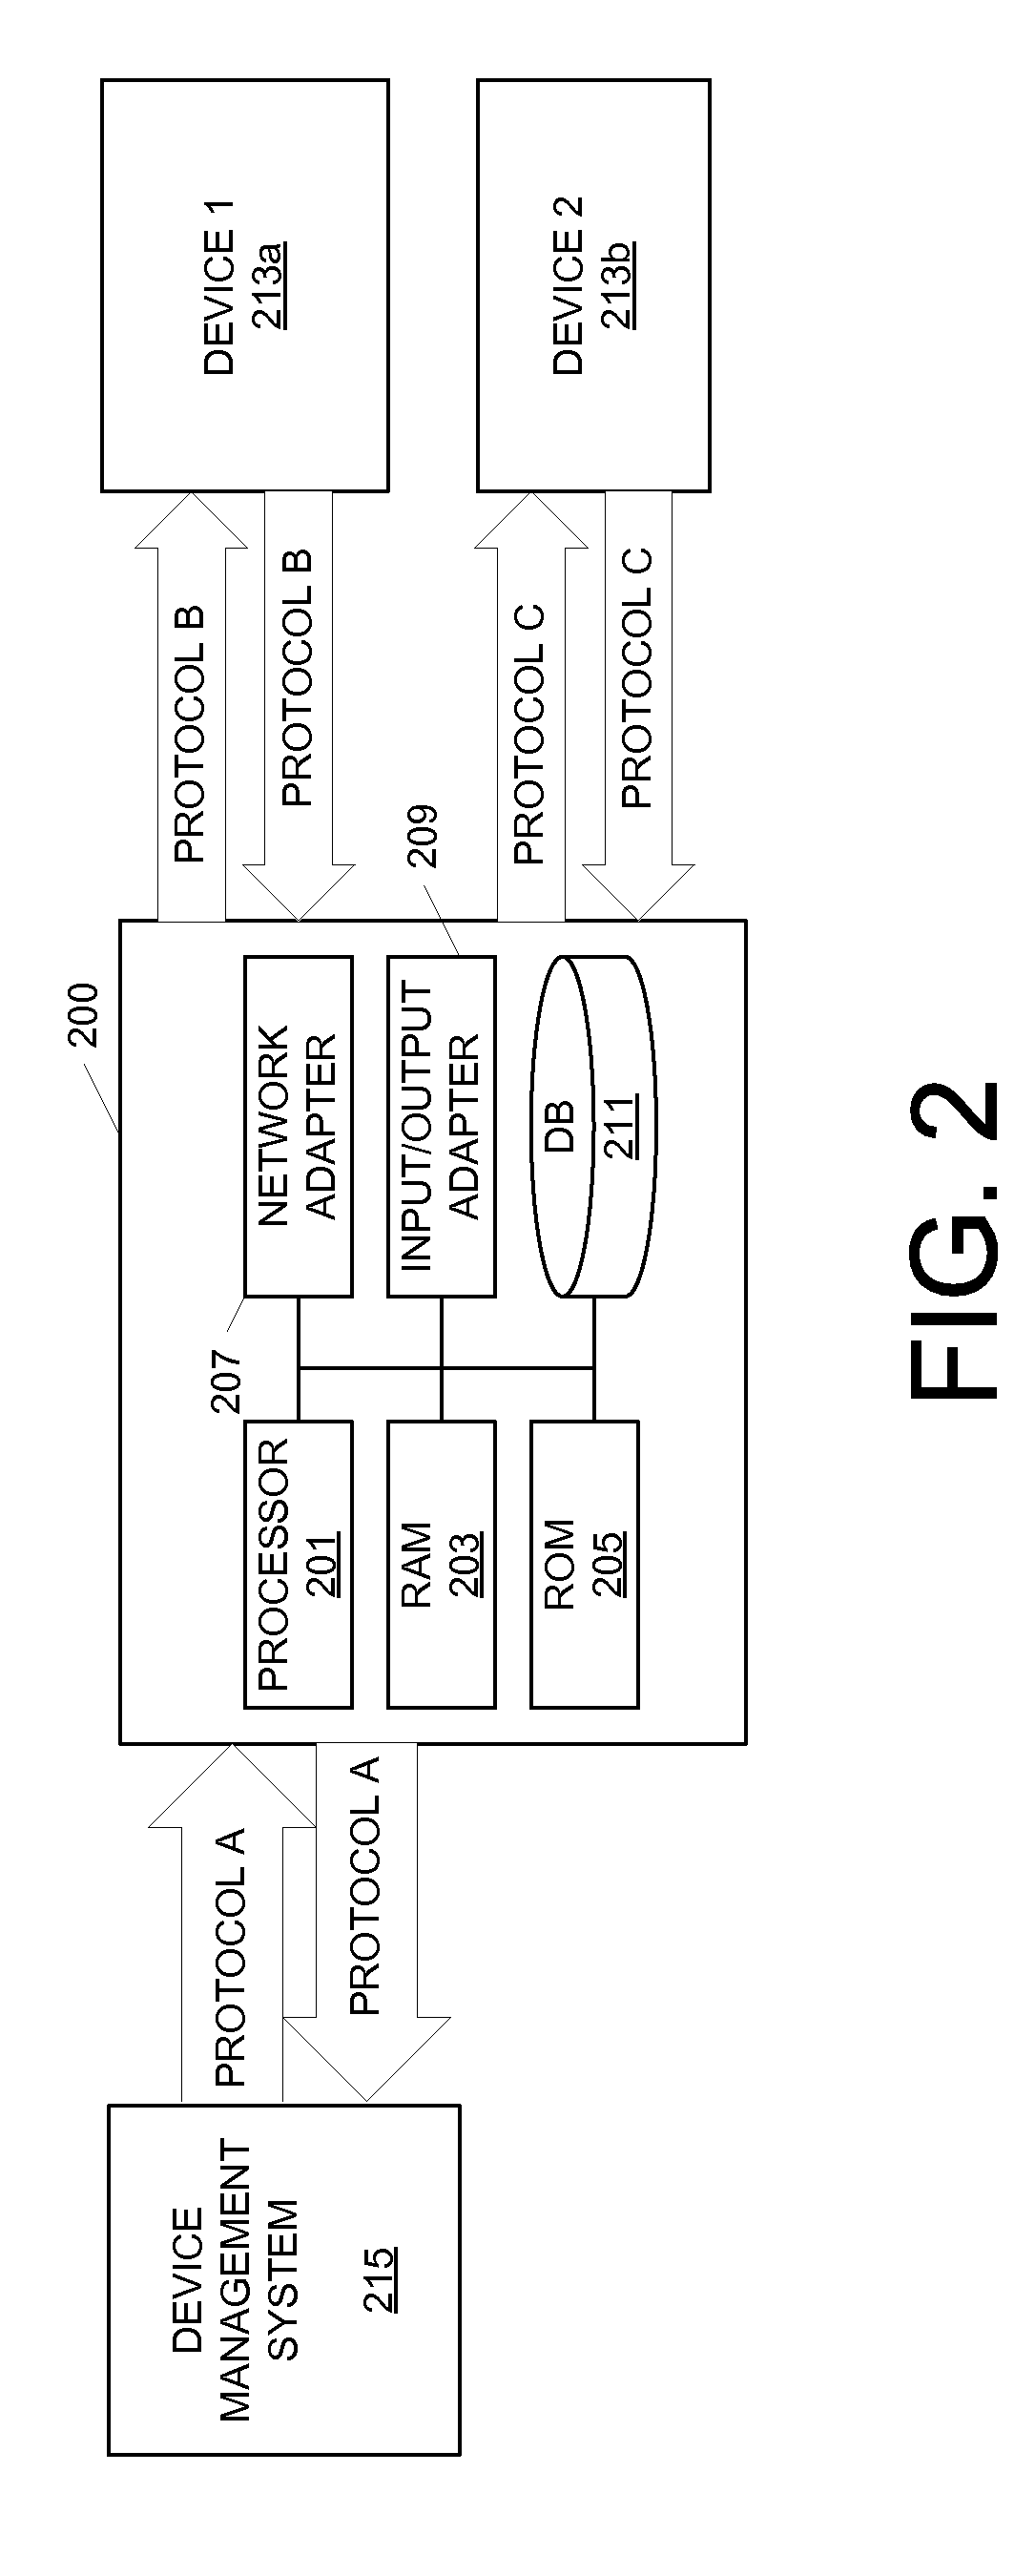 Device Communication, Monitoring and Control Architecture and Method